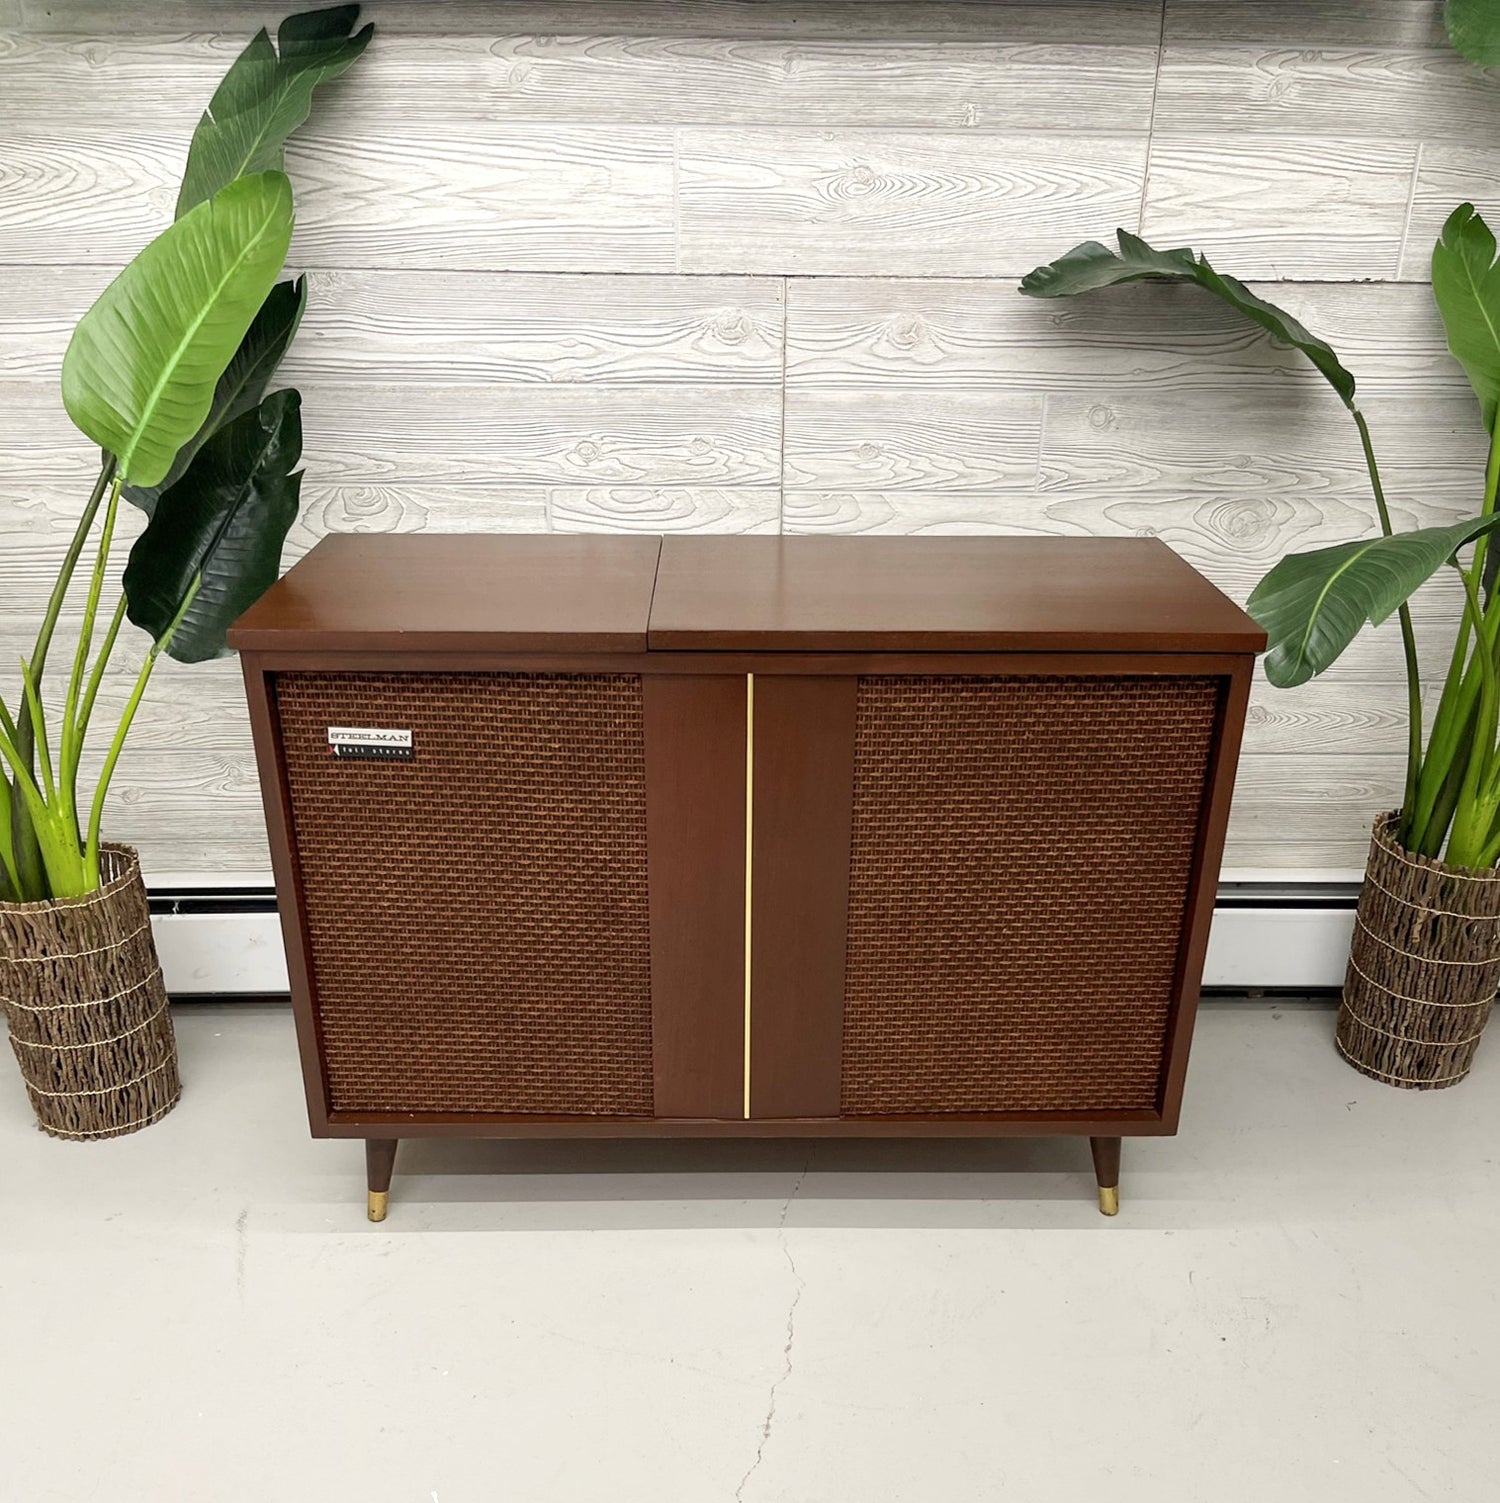 SOLD OUT!!! STEELMAN Mid Century Stereo Console Record Player Changer AM FM Bluetooth Alexa The Vintedge Co.